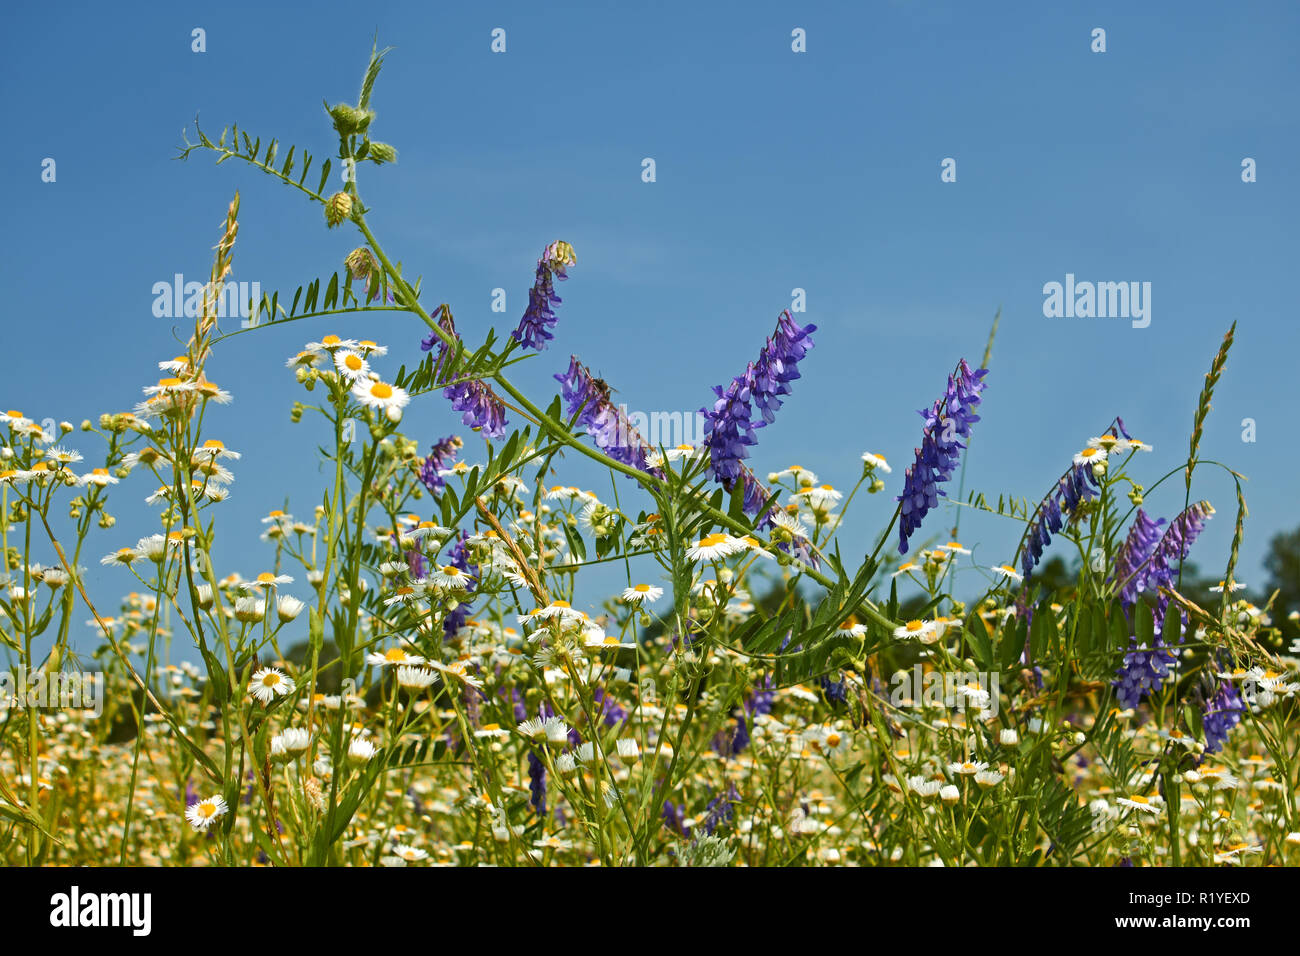 Rapid flowering of variety wild motley grasses on the blue sky background in sunny summer weather Stock Photo